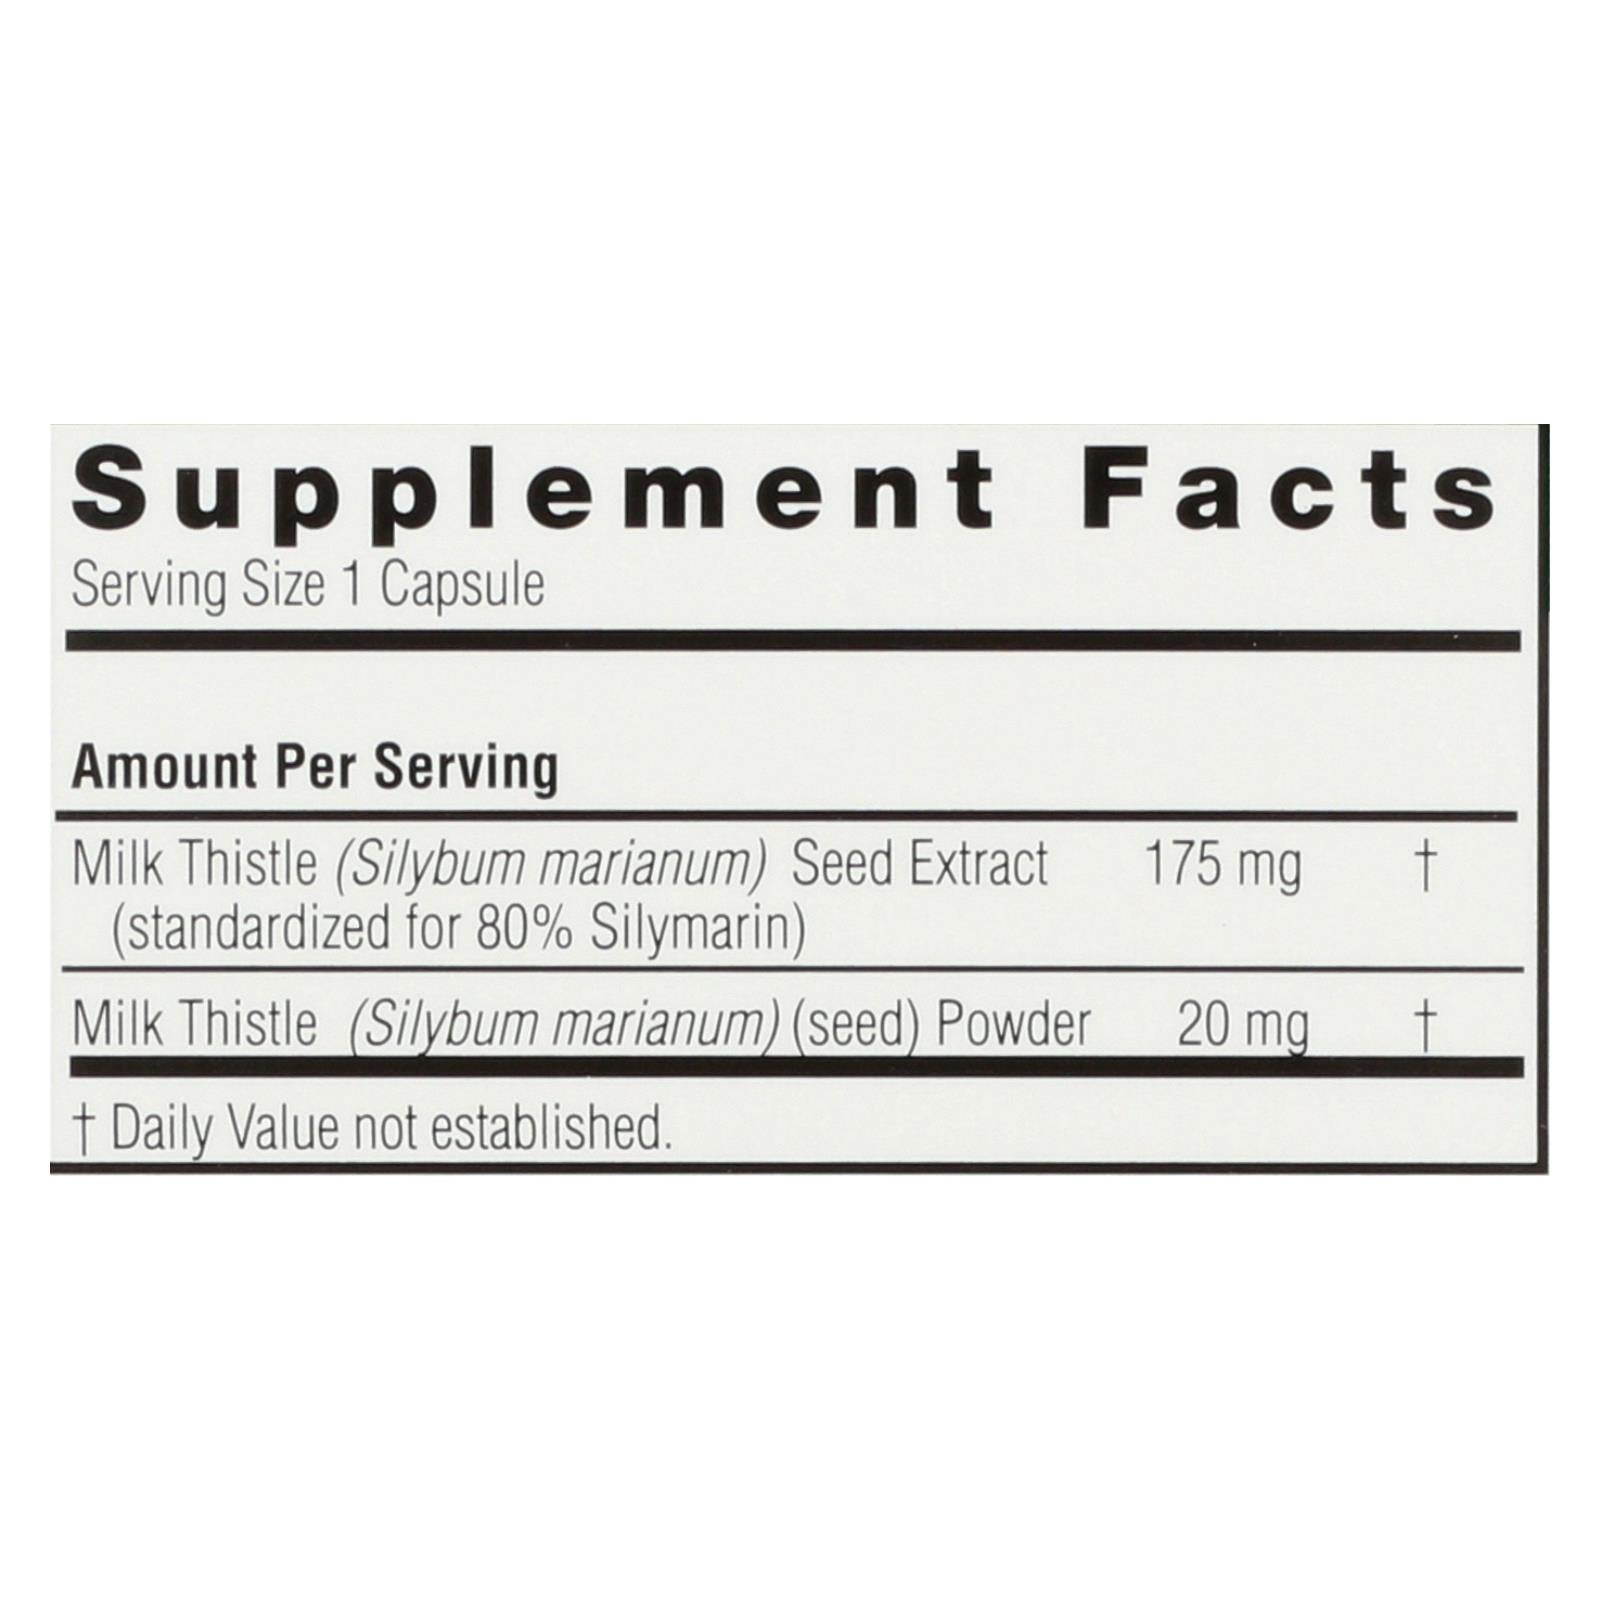 Nature's Answer - Milk Thistle Seed Extract - 120 Vegetarian Capsules